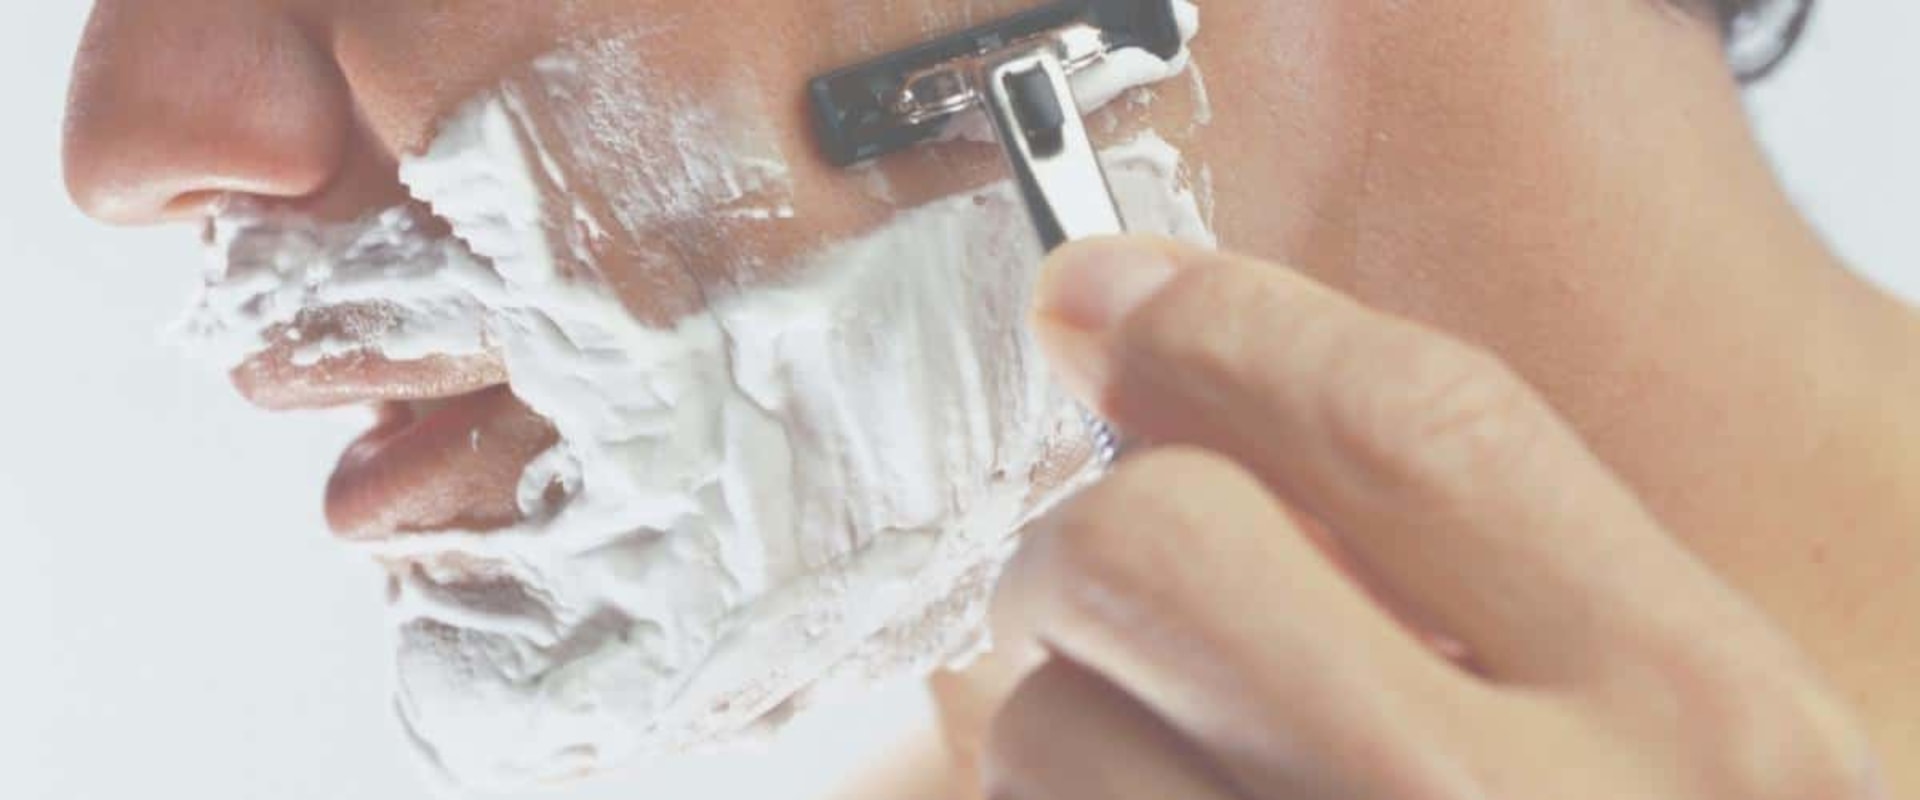 The Advantages of Phthalate-Free Men's Beauty Care Products